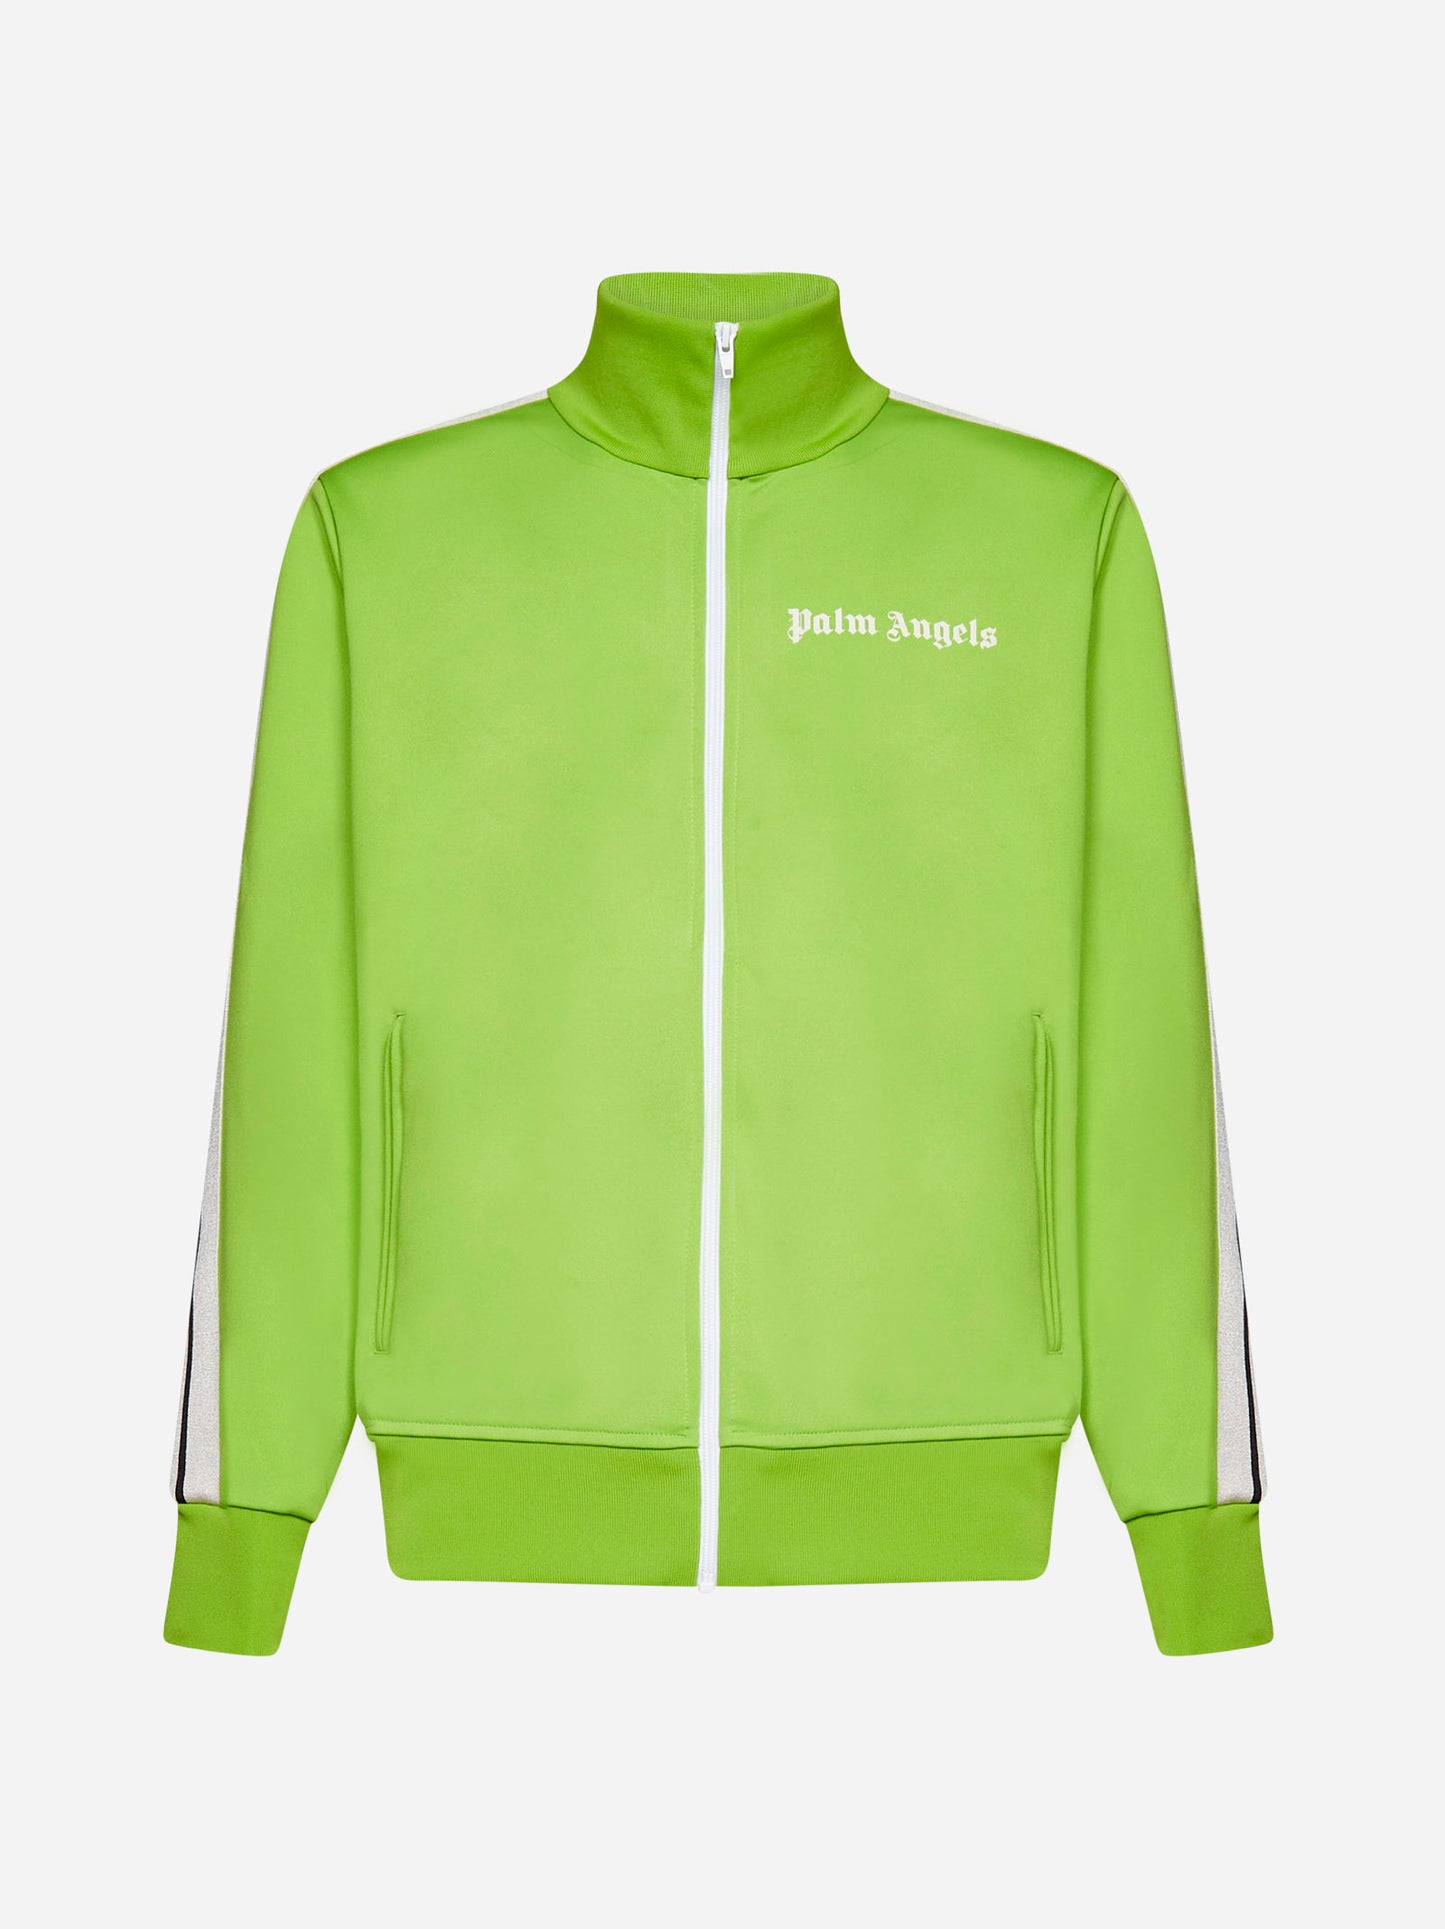 Palm Angels Track Top Jacket